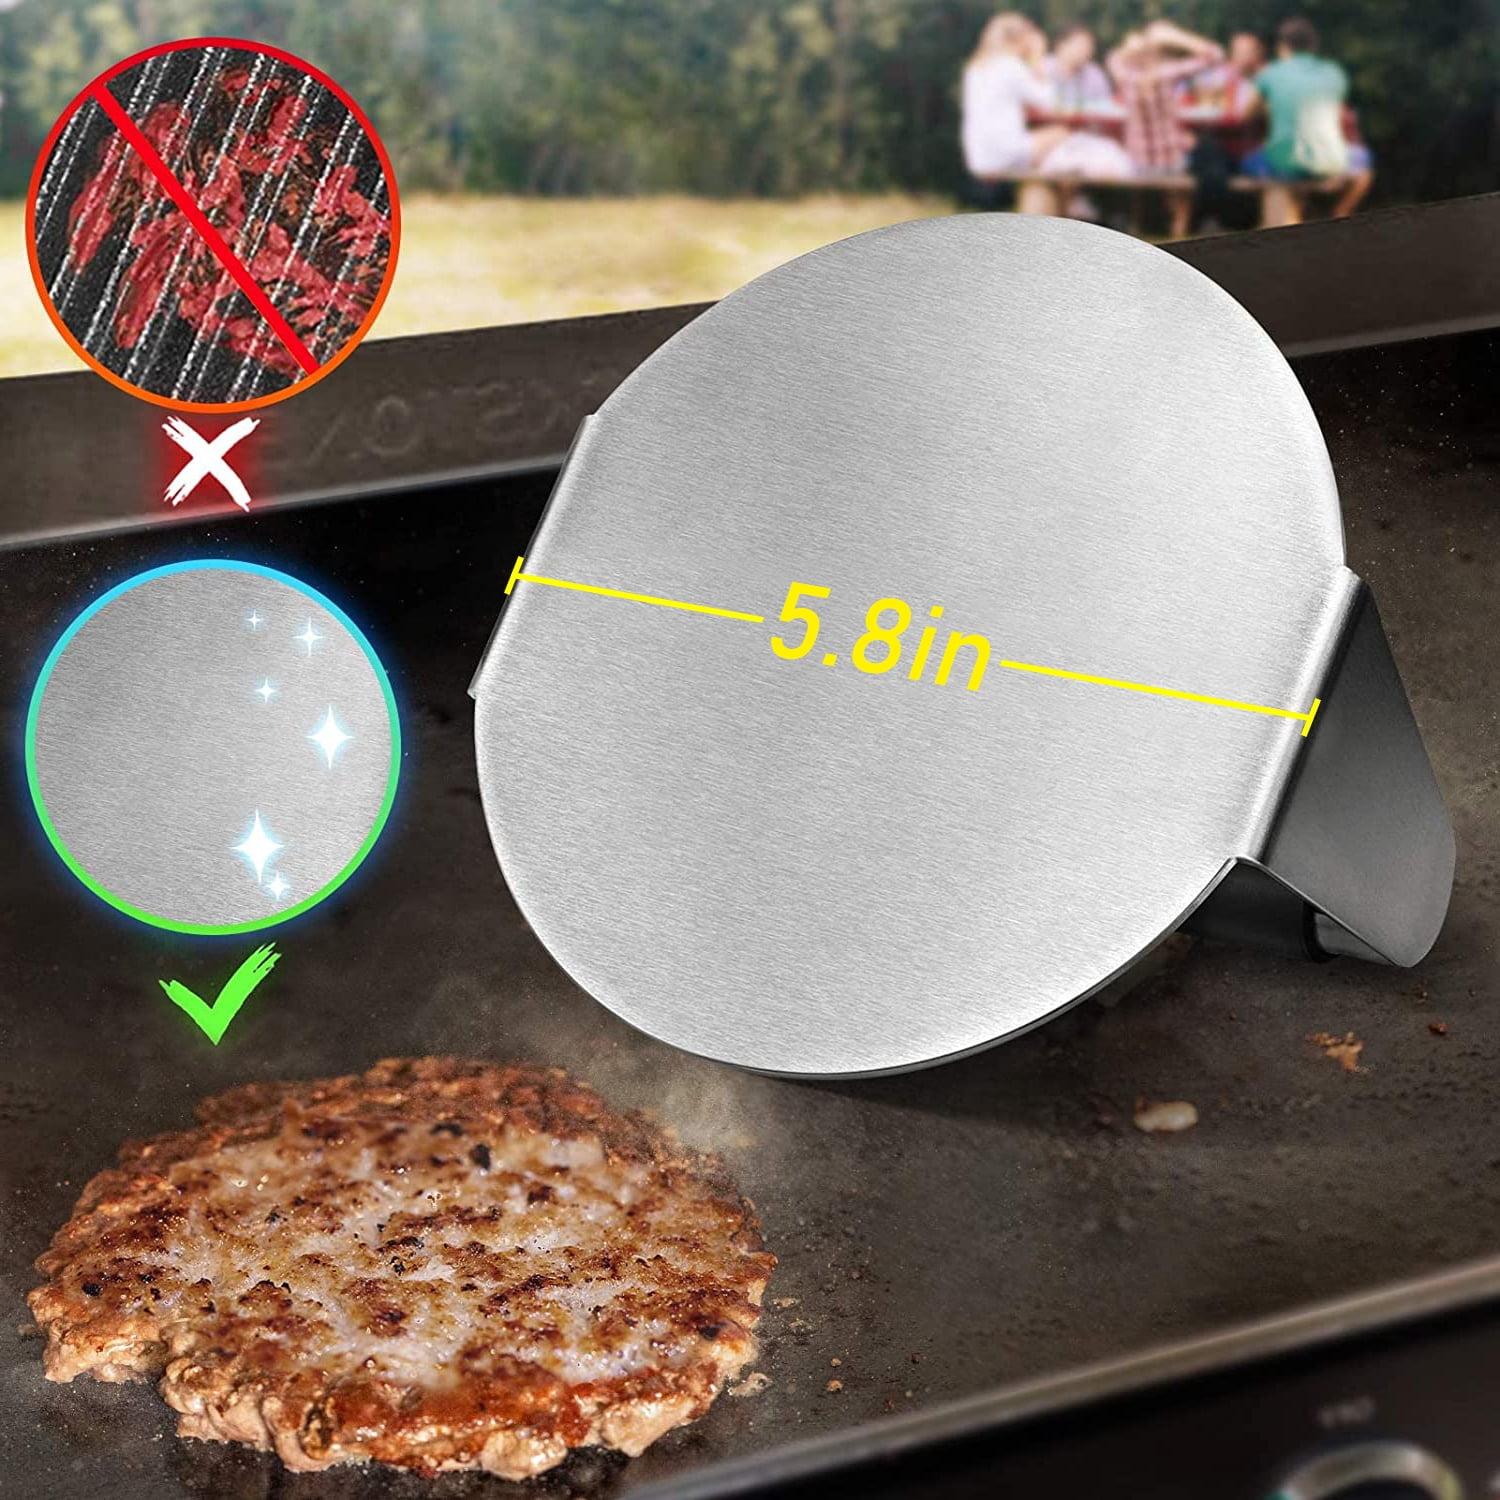 ALLTOP Smash Burger Press,Stainless Steel Non-Stick Smasher Hamburger Patty  Maker for Flat Top Griddle,BBQ,Kitchen - Wood Handle,5.5” Round Grill Tool  - Yahoo Shopping